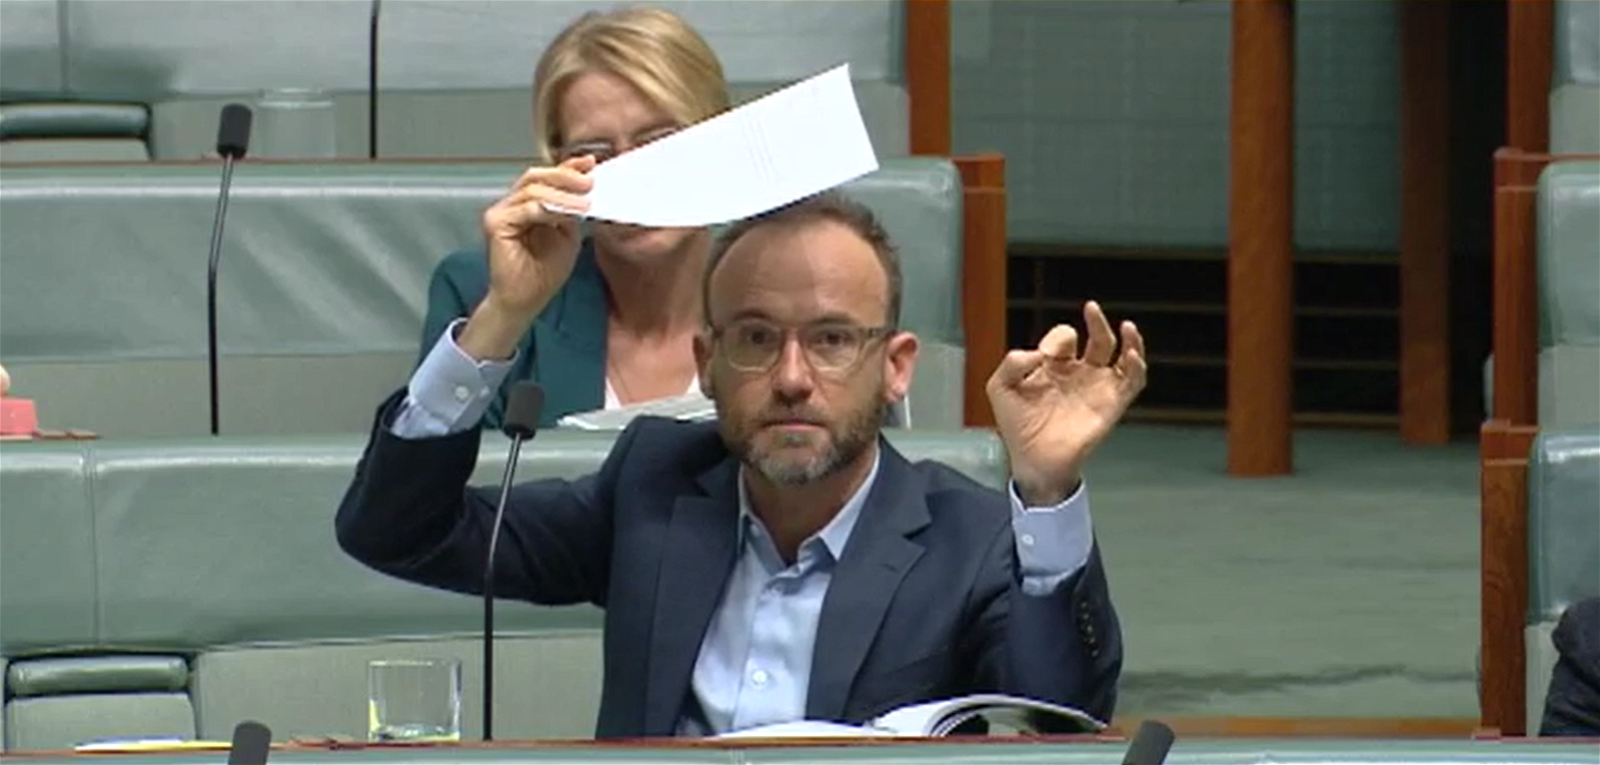 Adam Bandt holds a piece of paper over his head.